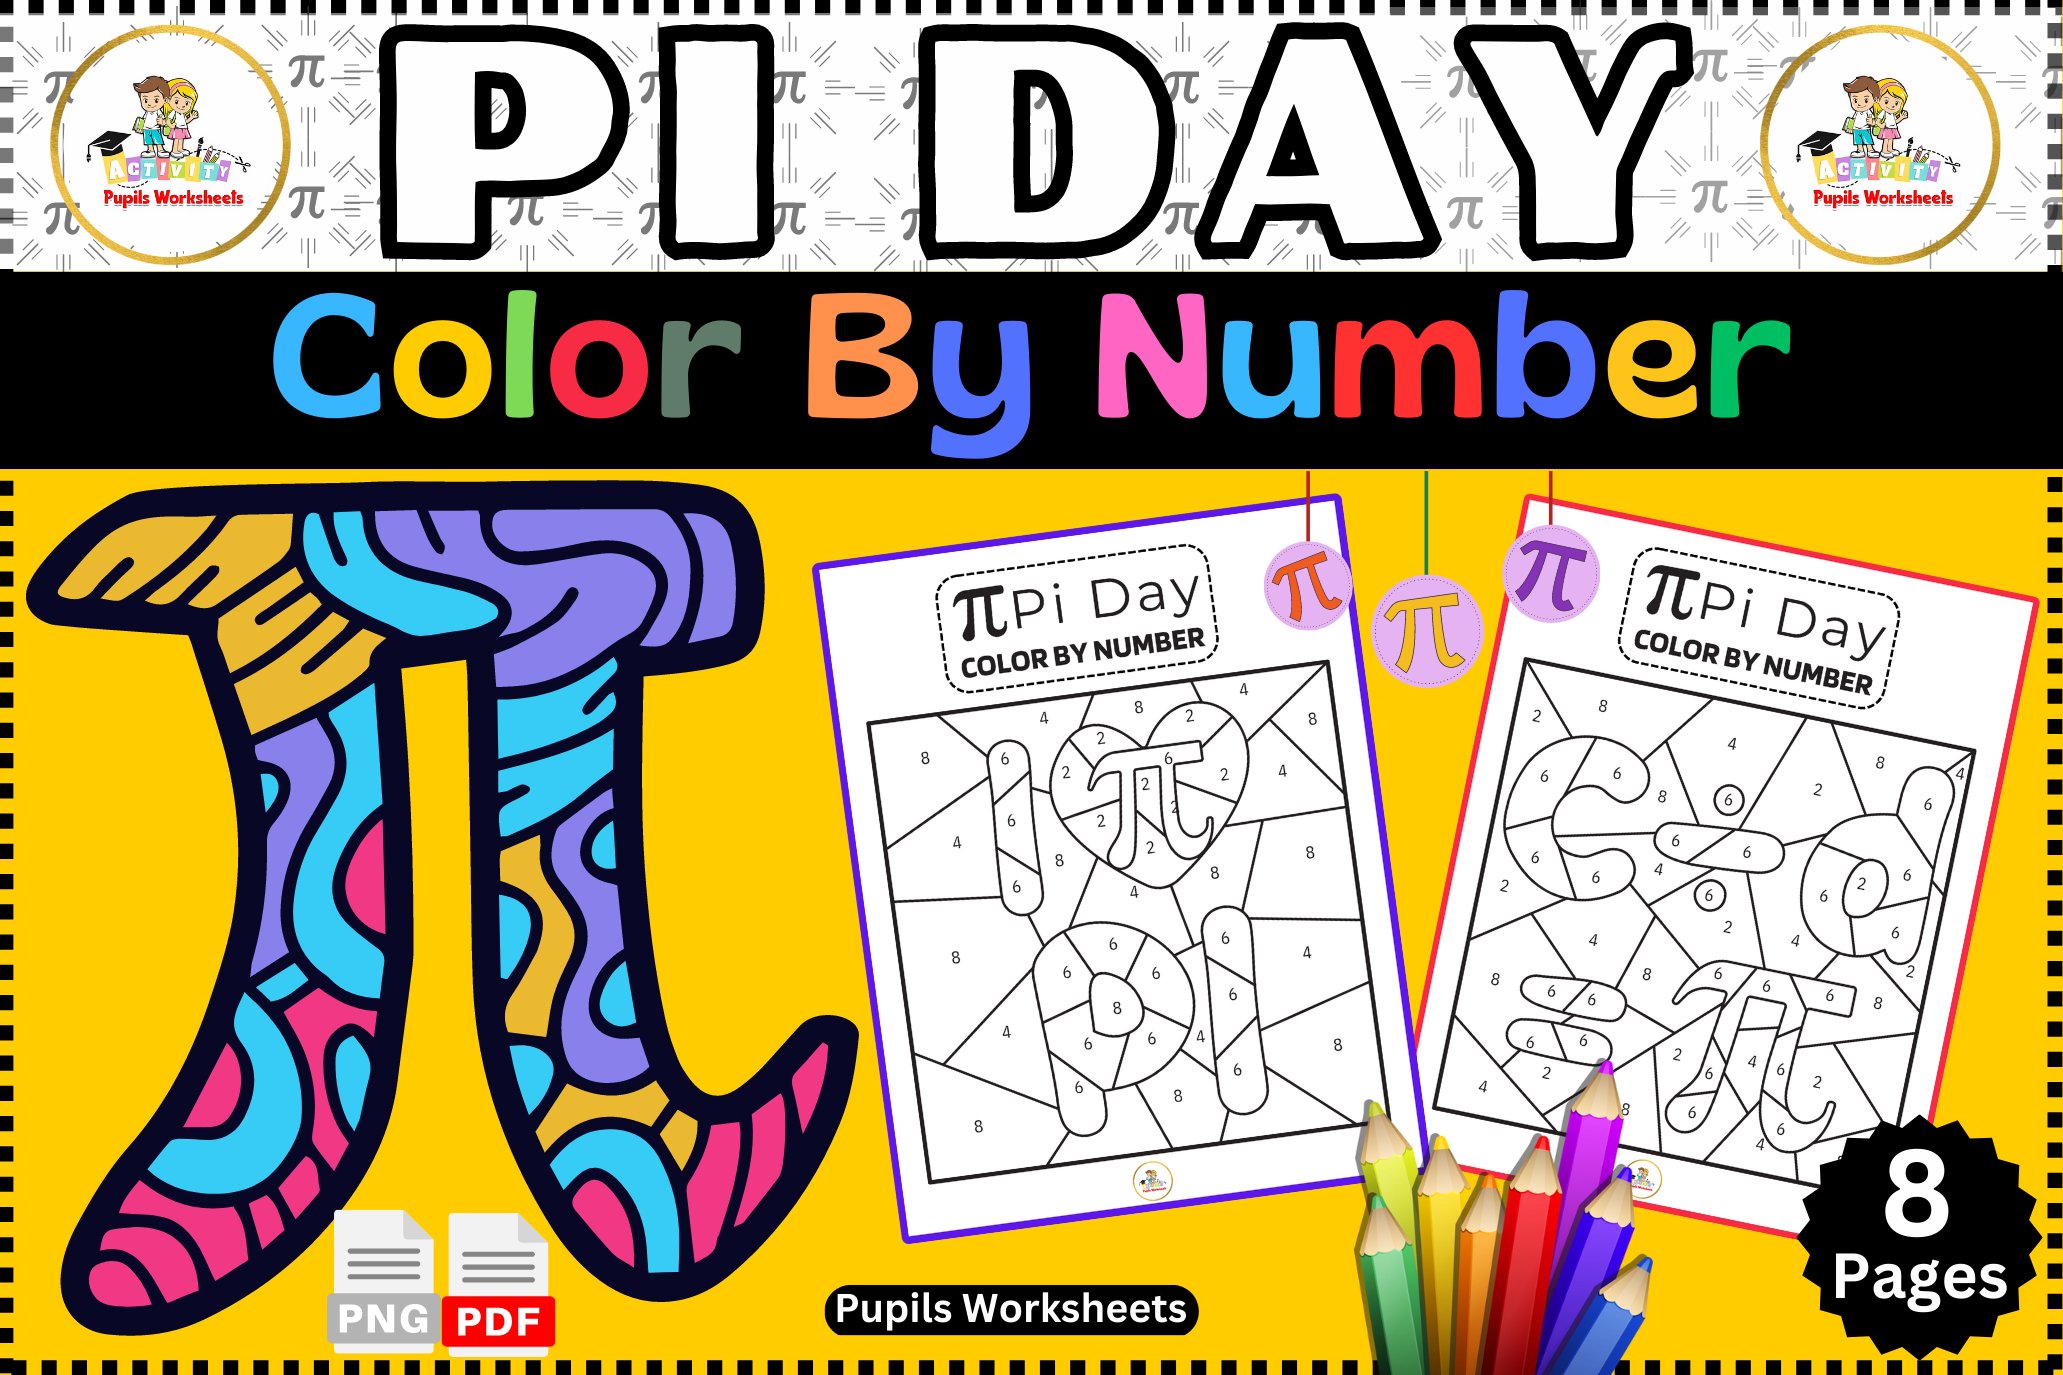 Pi day color by number